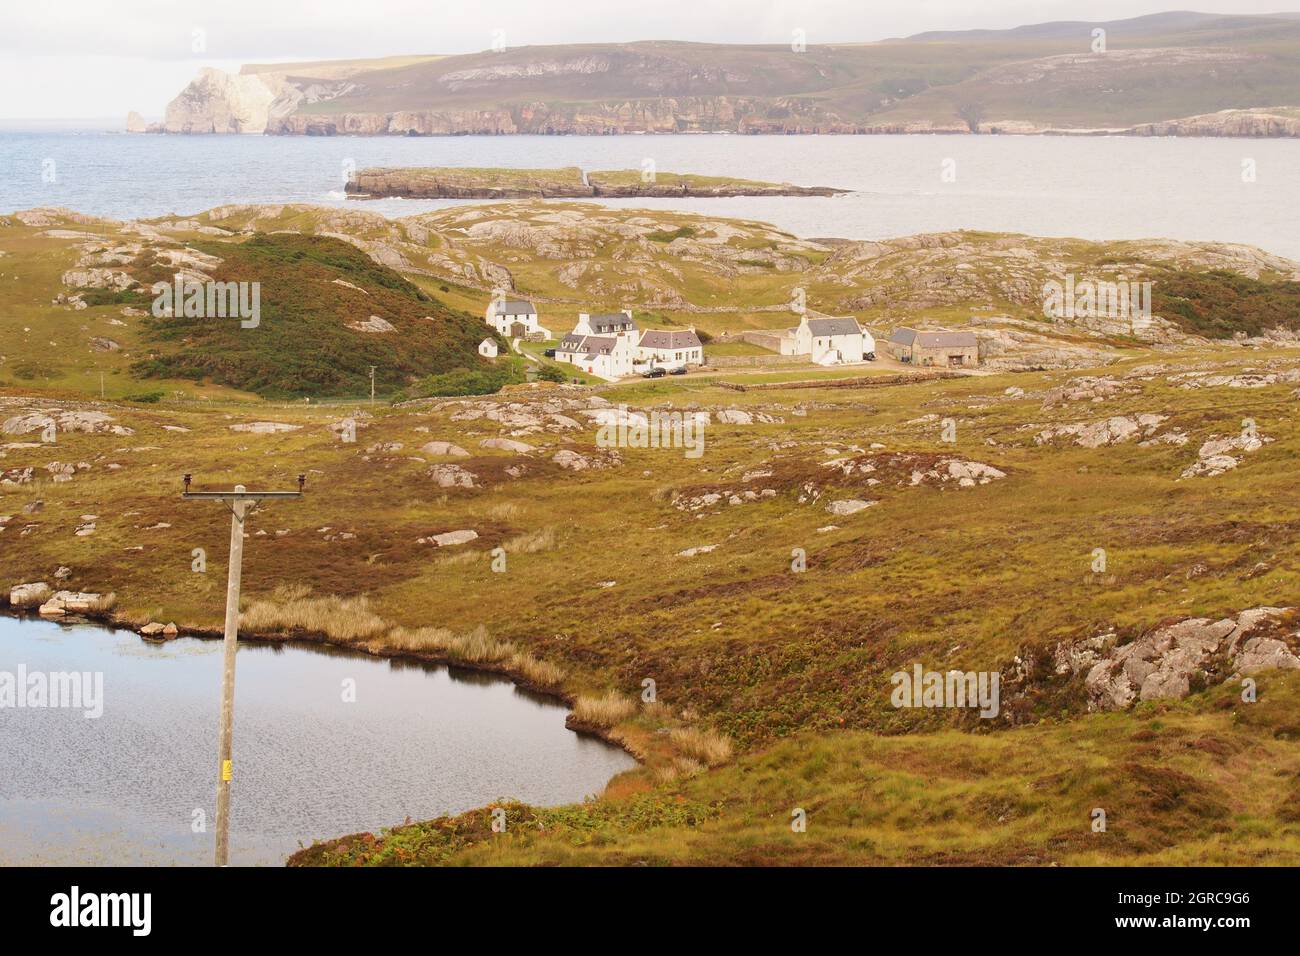 A view of a man-made lake at Rispond, Durness, Sutherland, Scotland with Rispond, Whiten Head, and the sea in the background Stock Photo